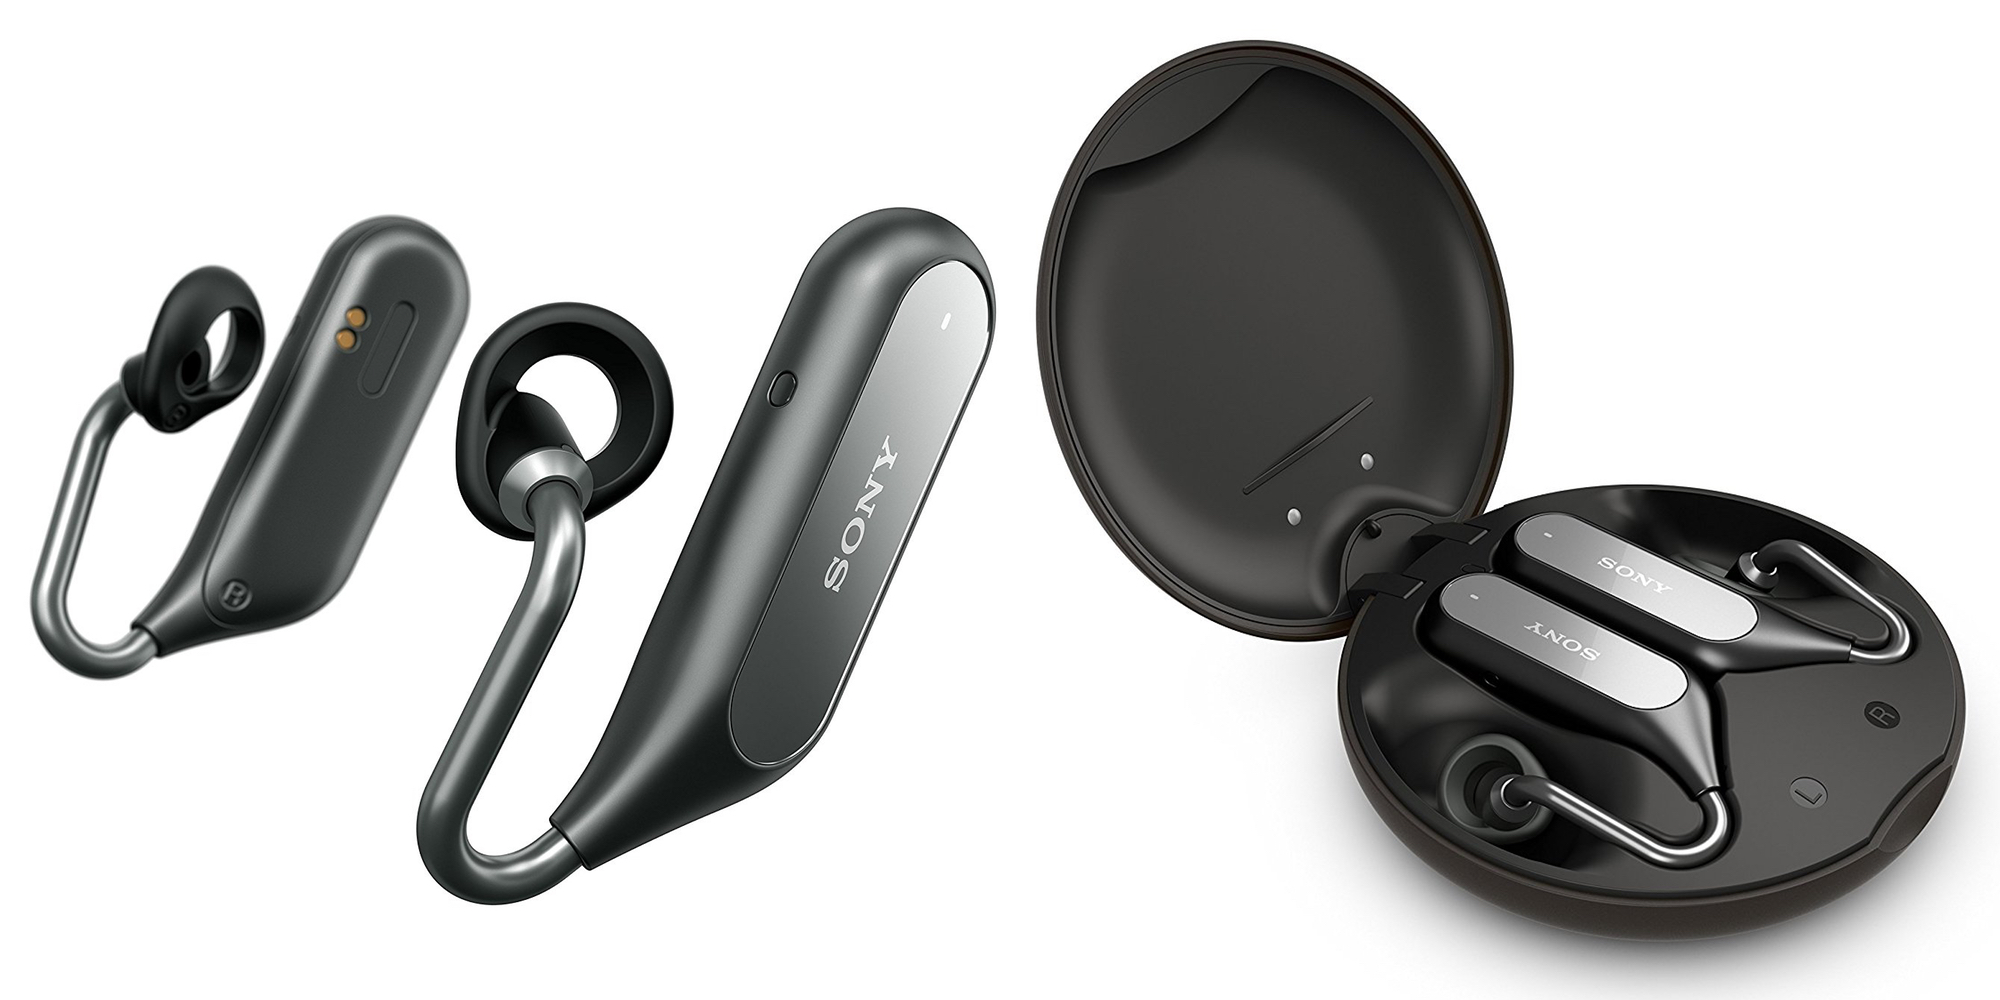 Sony Xperia Ear Duo True Wireless Earbuds get first major price drop to  $200 (Reg. $280)